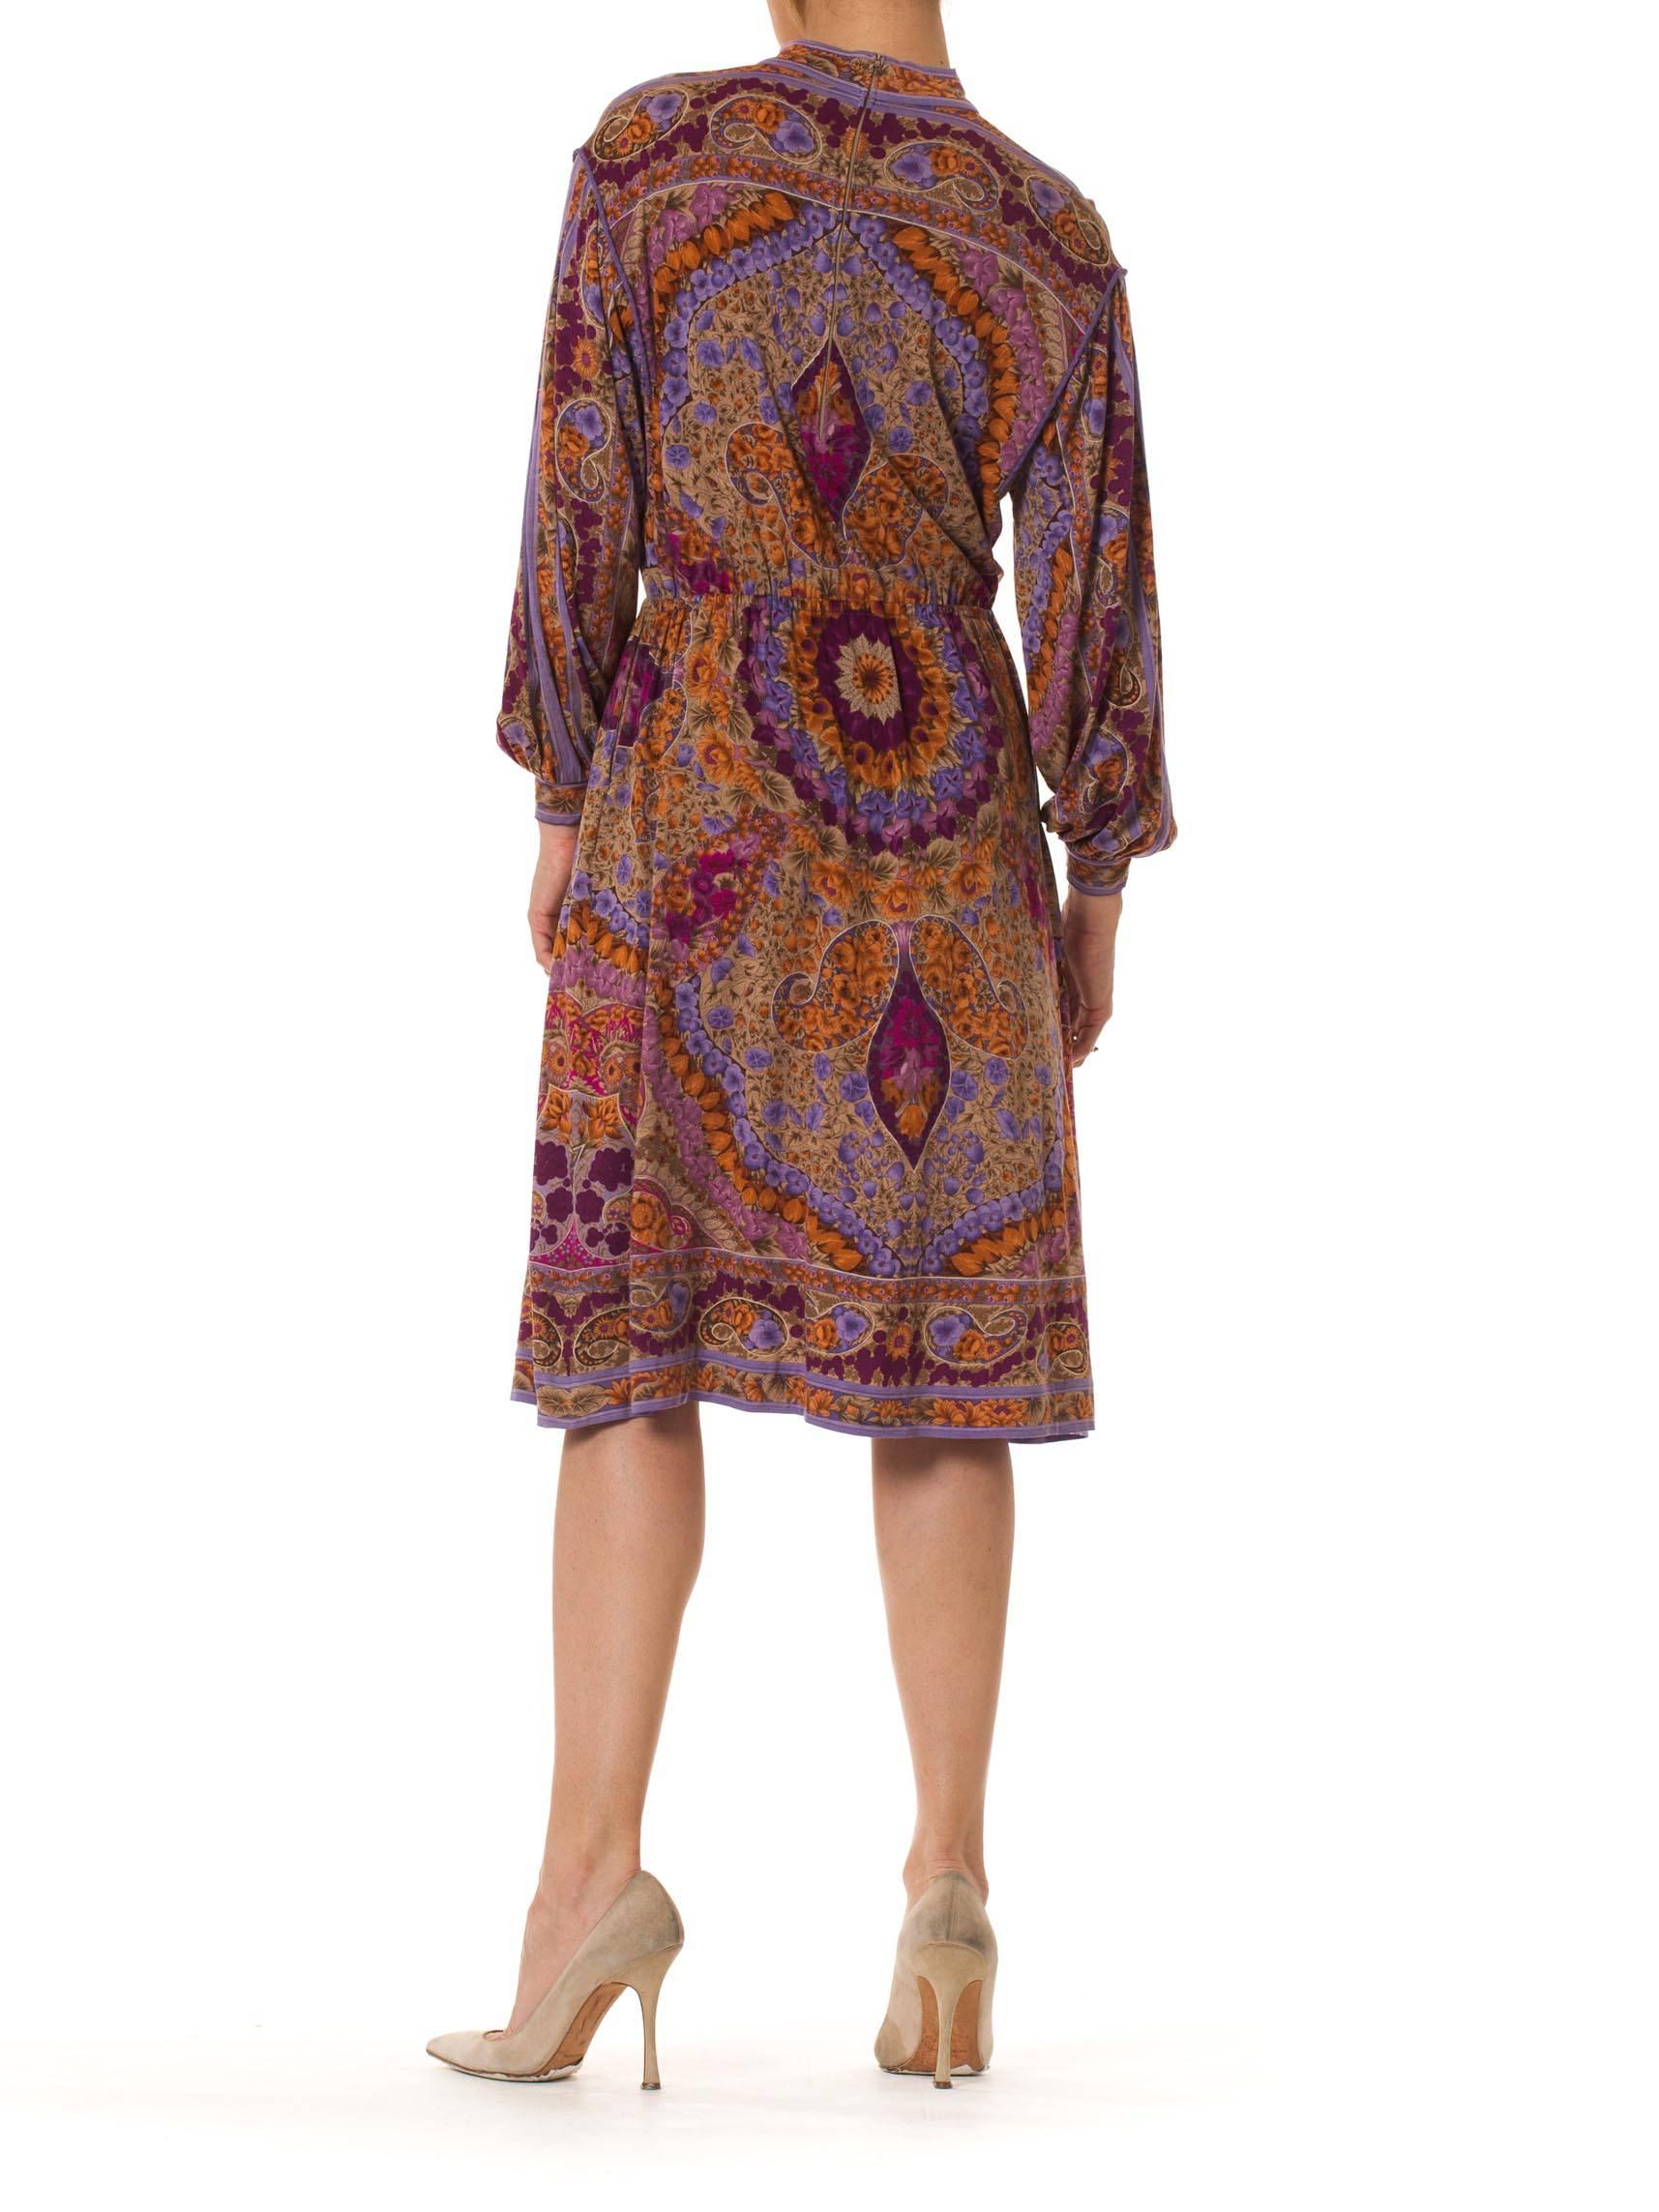 Women's 1970s Leonard Wool Jersey Dress with Rich Indian Floral Print